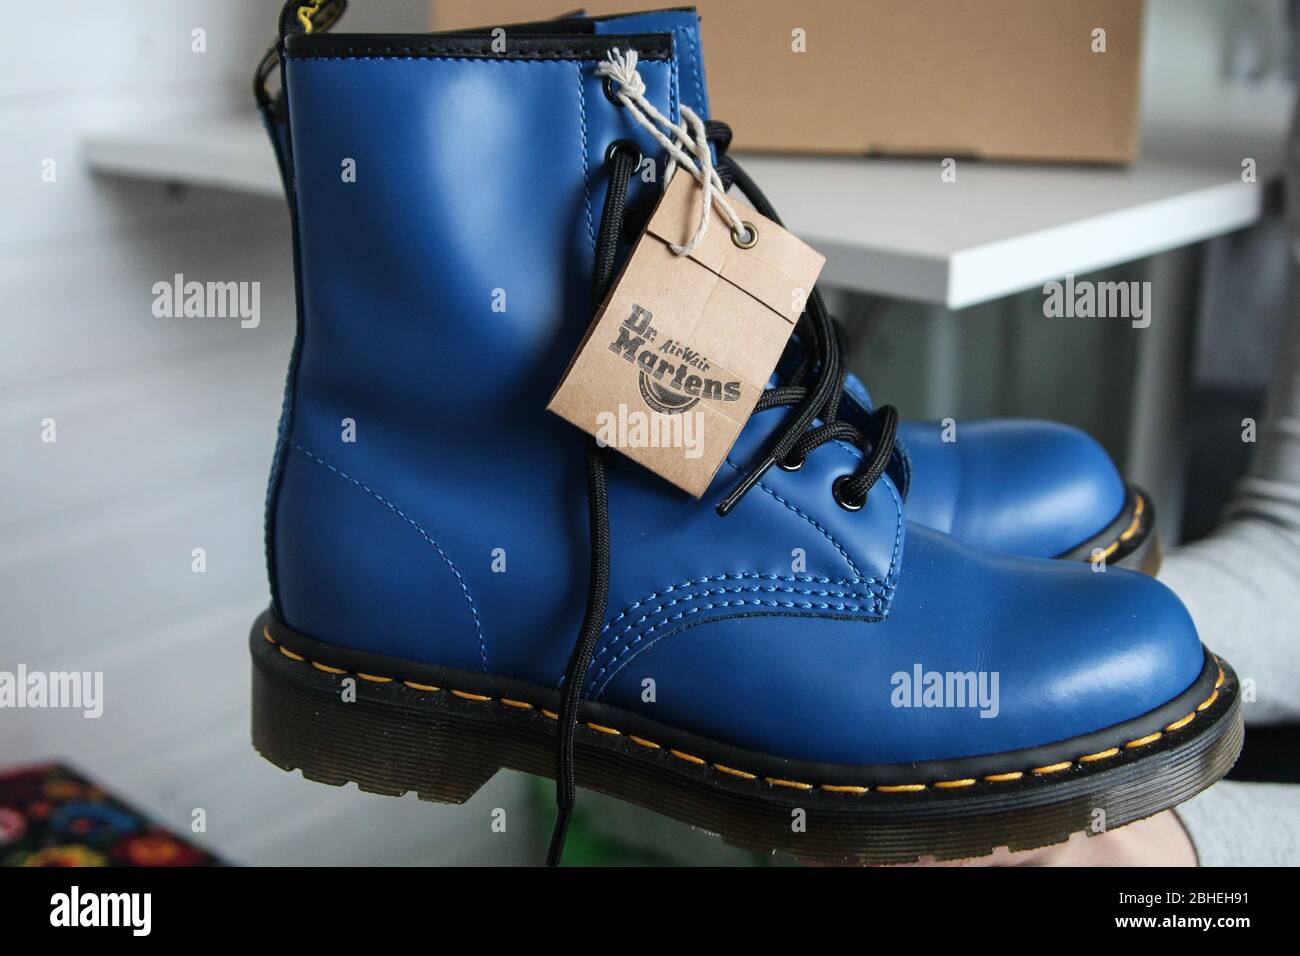 Oslonino, Poland 25th, April 2020 Woman looks at her new pair of Dr. Martens  1460 Air Wair blue leather boots in Oslonino, Poland on 25 April 2020 ©  Vadim Pacajev / Alamy Live News Stock Photo - Alamy